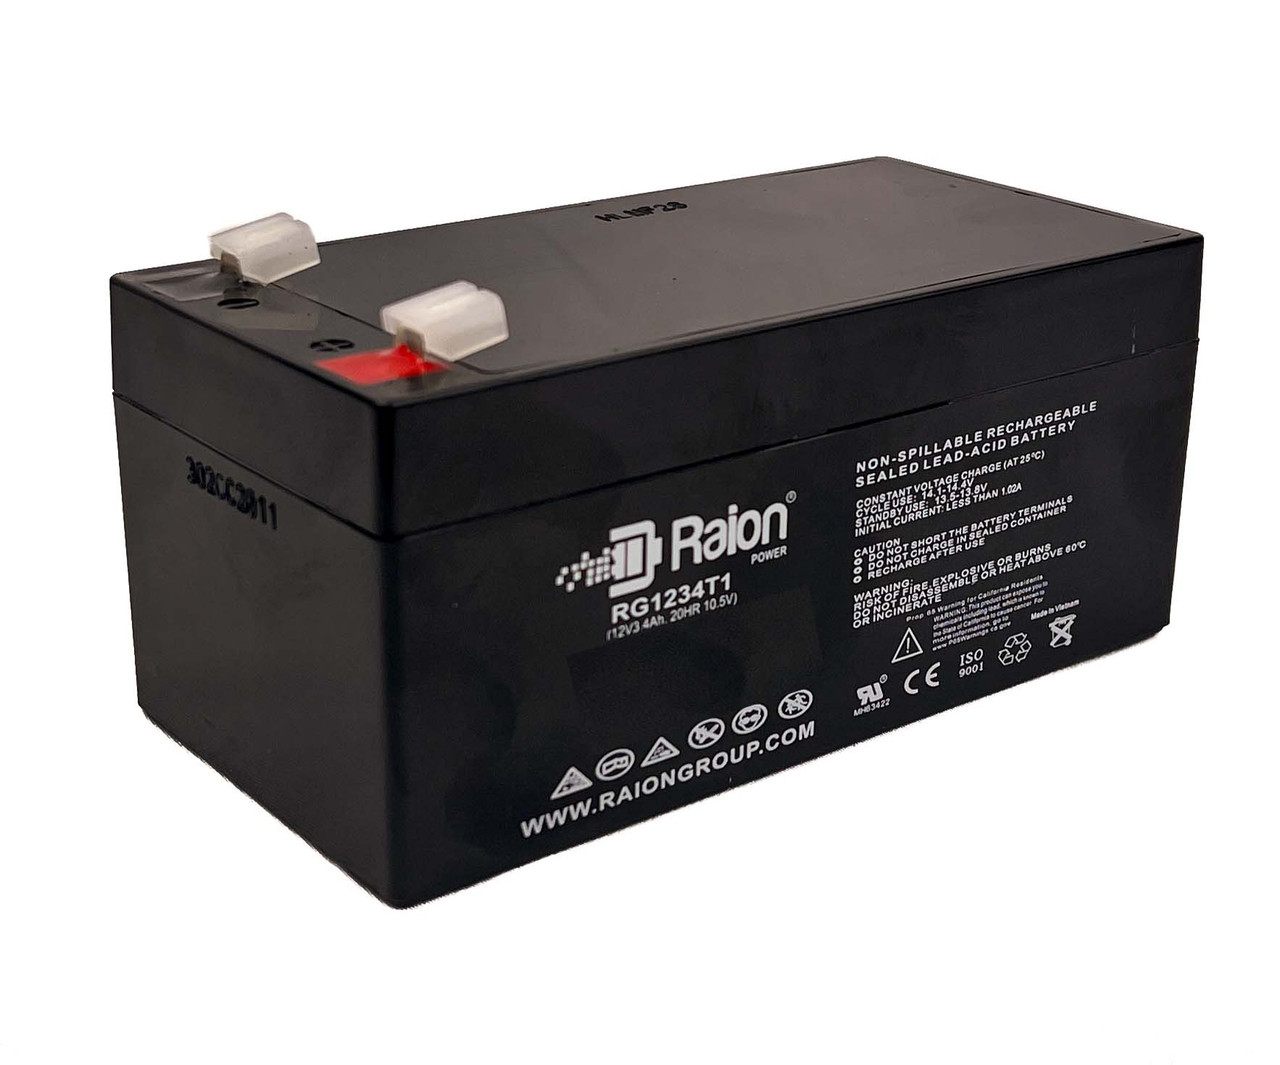 Raion Power 12V 3.4Ah Non-Spillable Replacement Battery for CSB GH1234